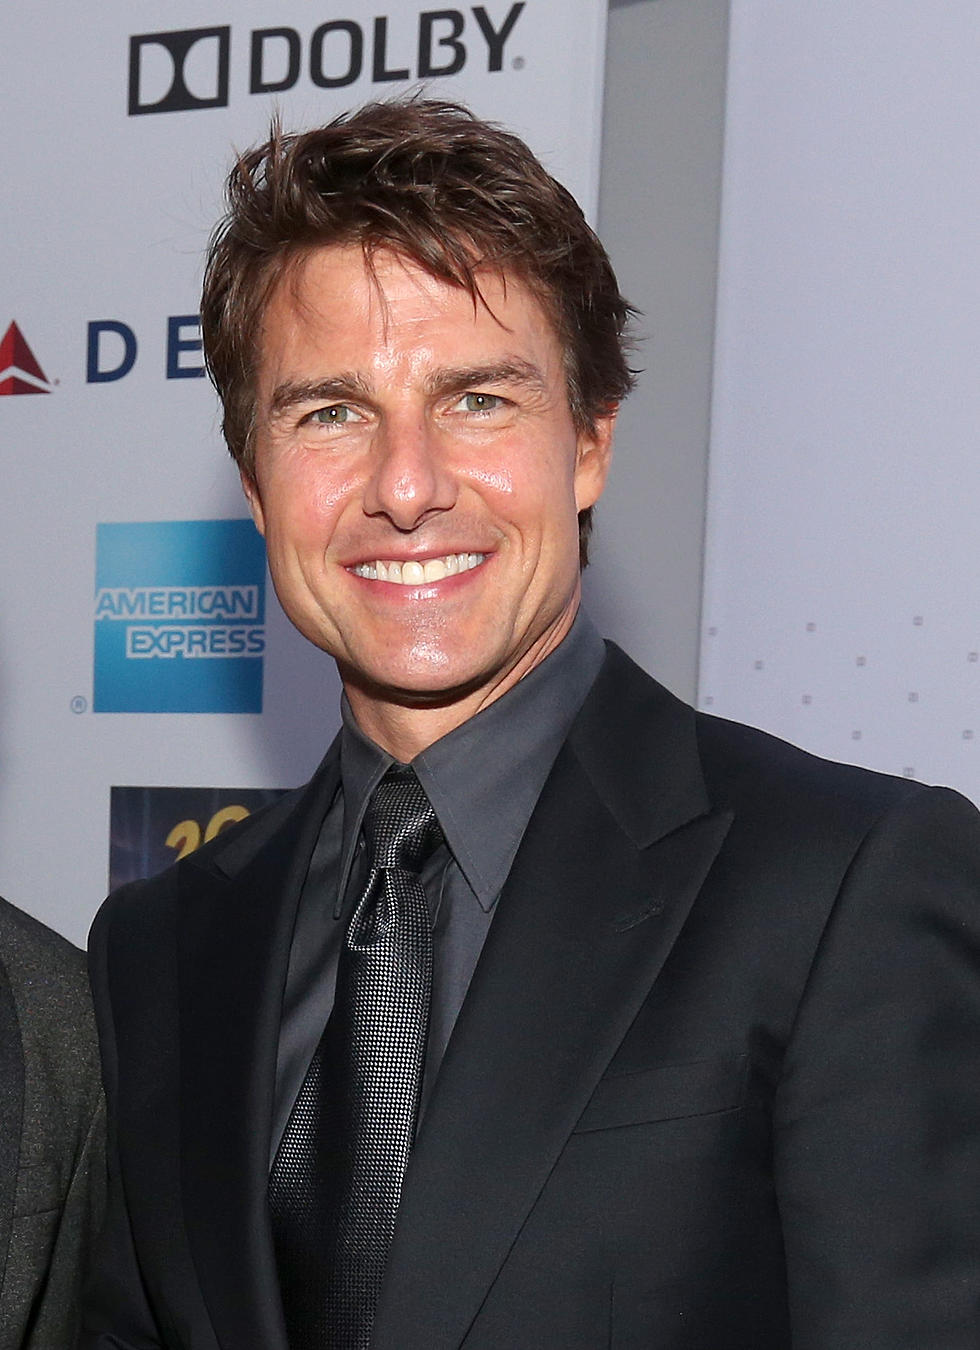 Tom Cruise, “The 500-Million Dollar Man” and How He Got There!